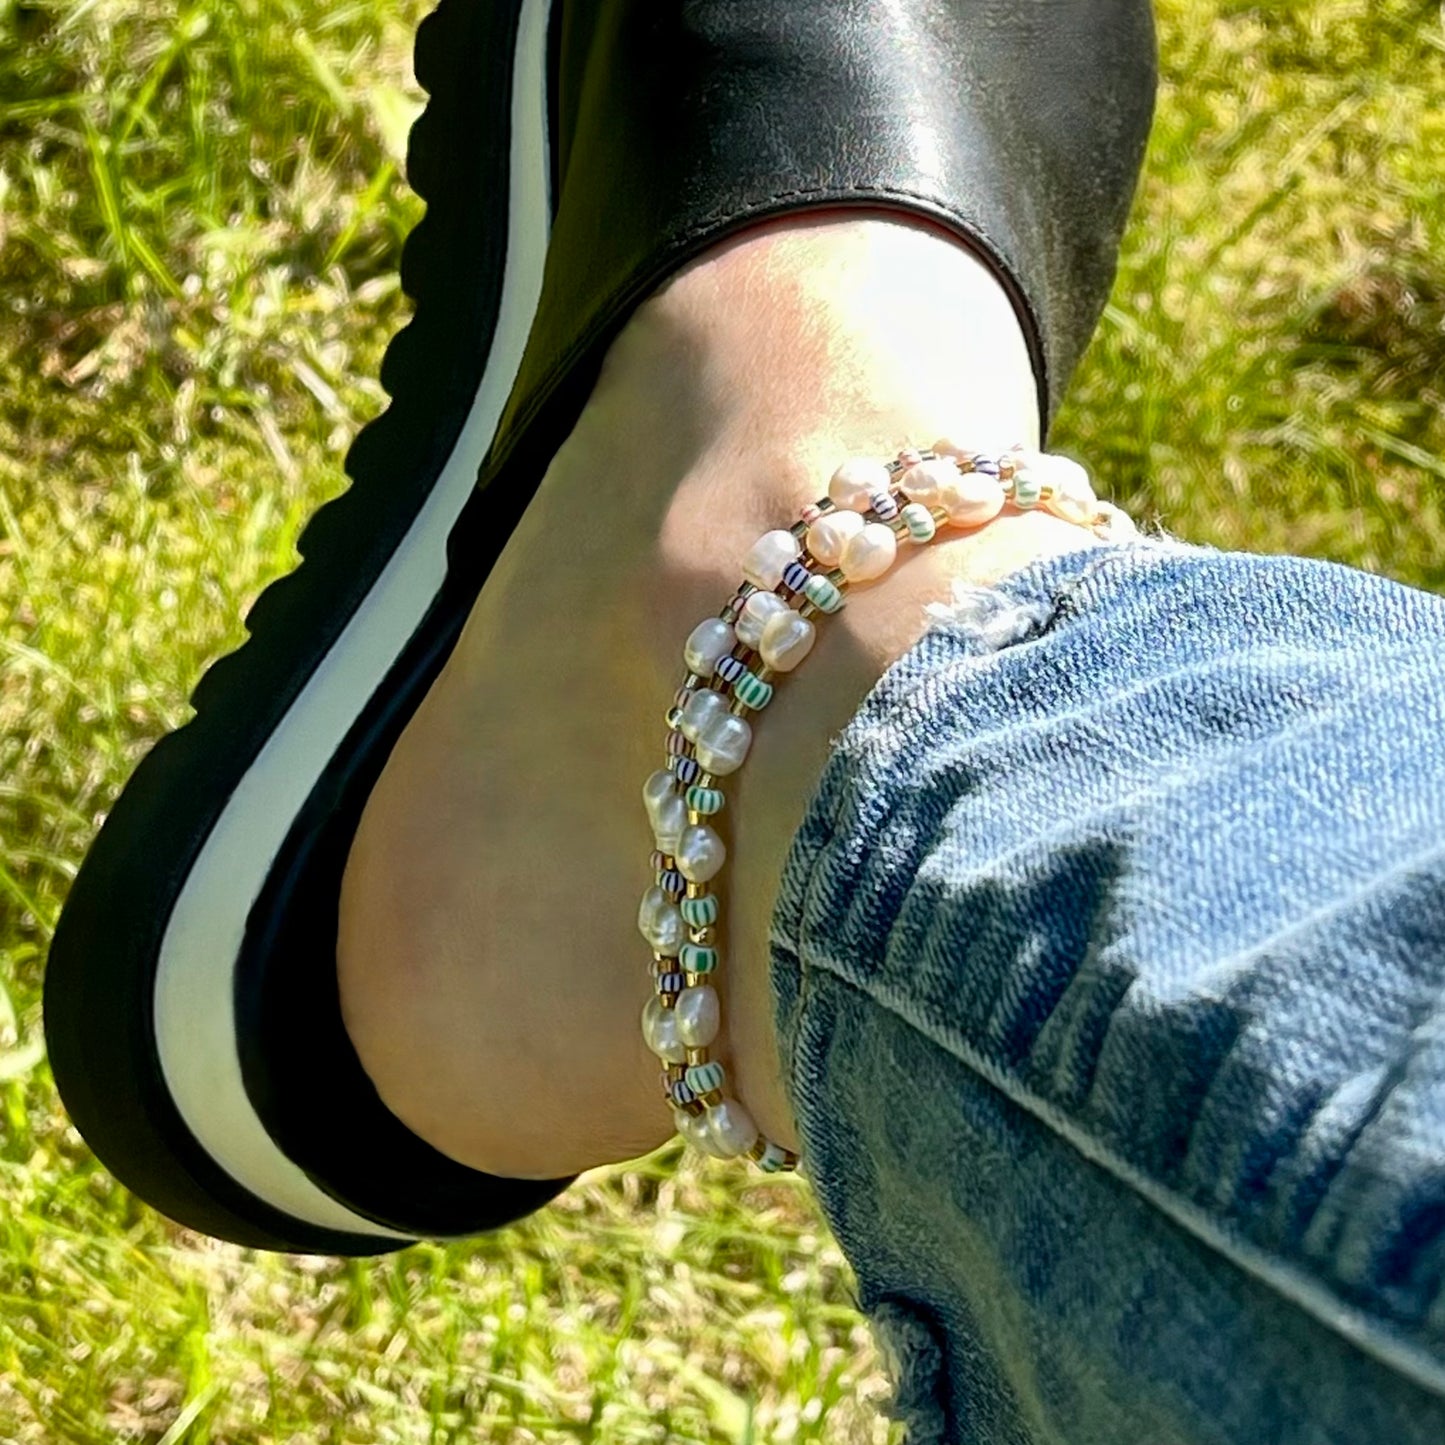 Pearl anklet summer set with freshwater pearls and red, blue, and green & white striped seed beads and gold, silver or bronze tone accent beads on stretch cord.